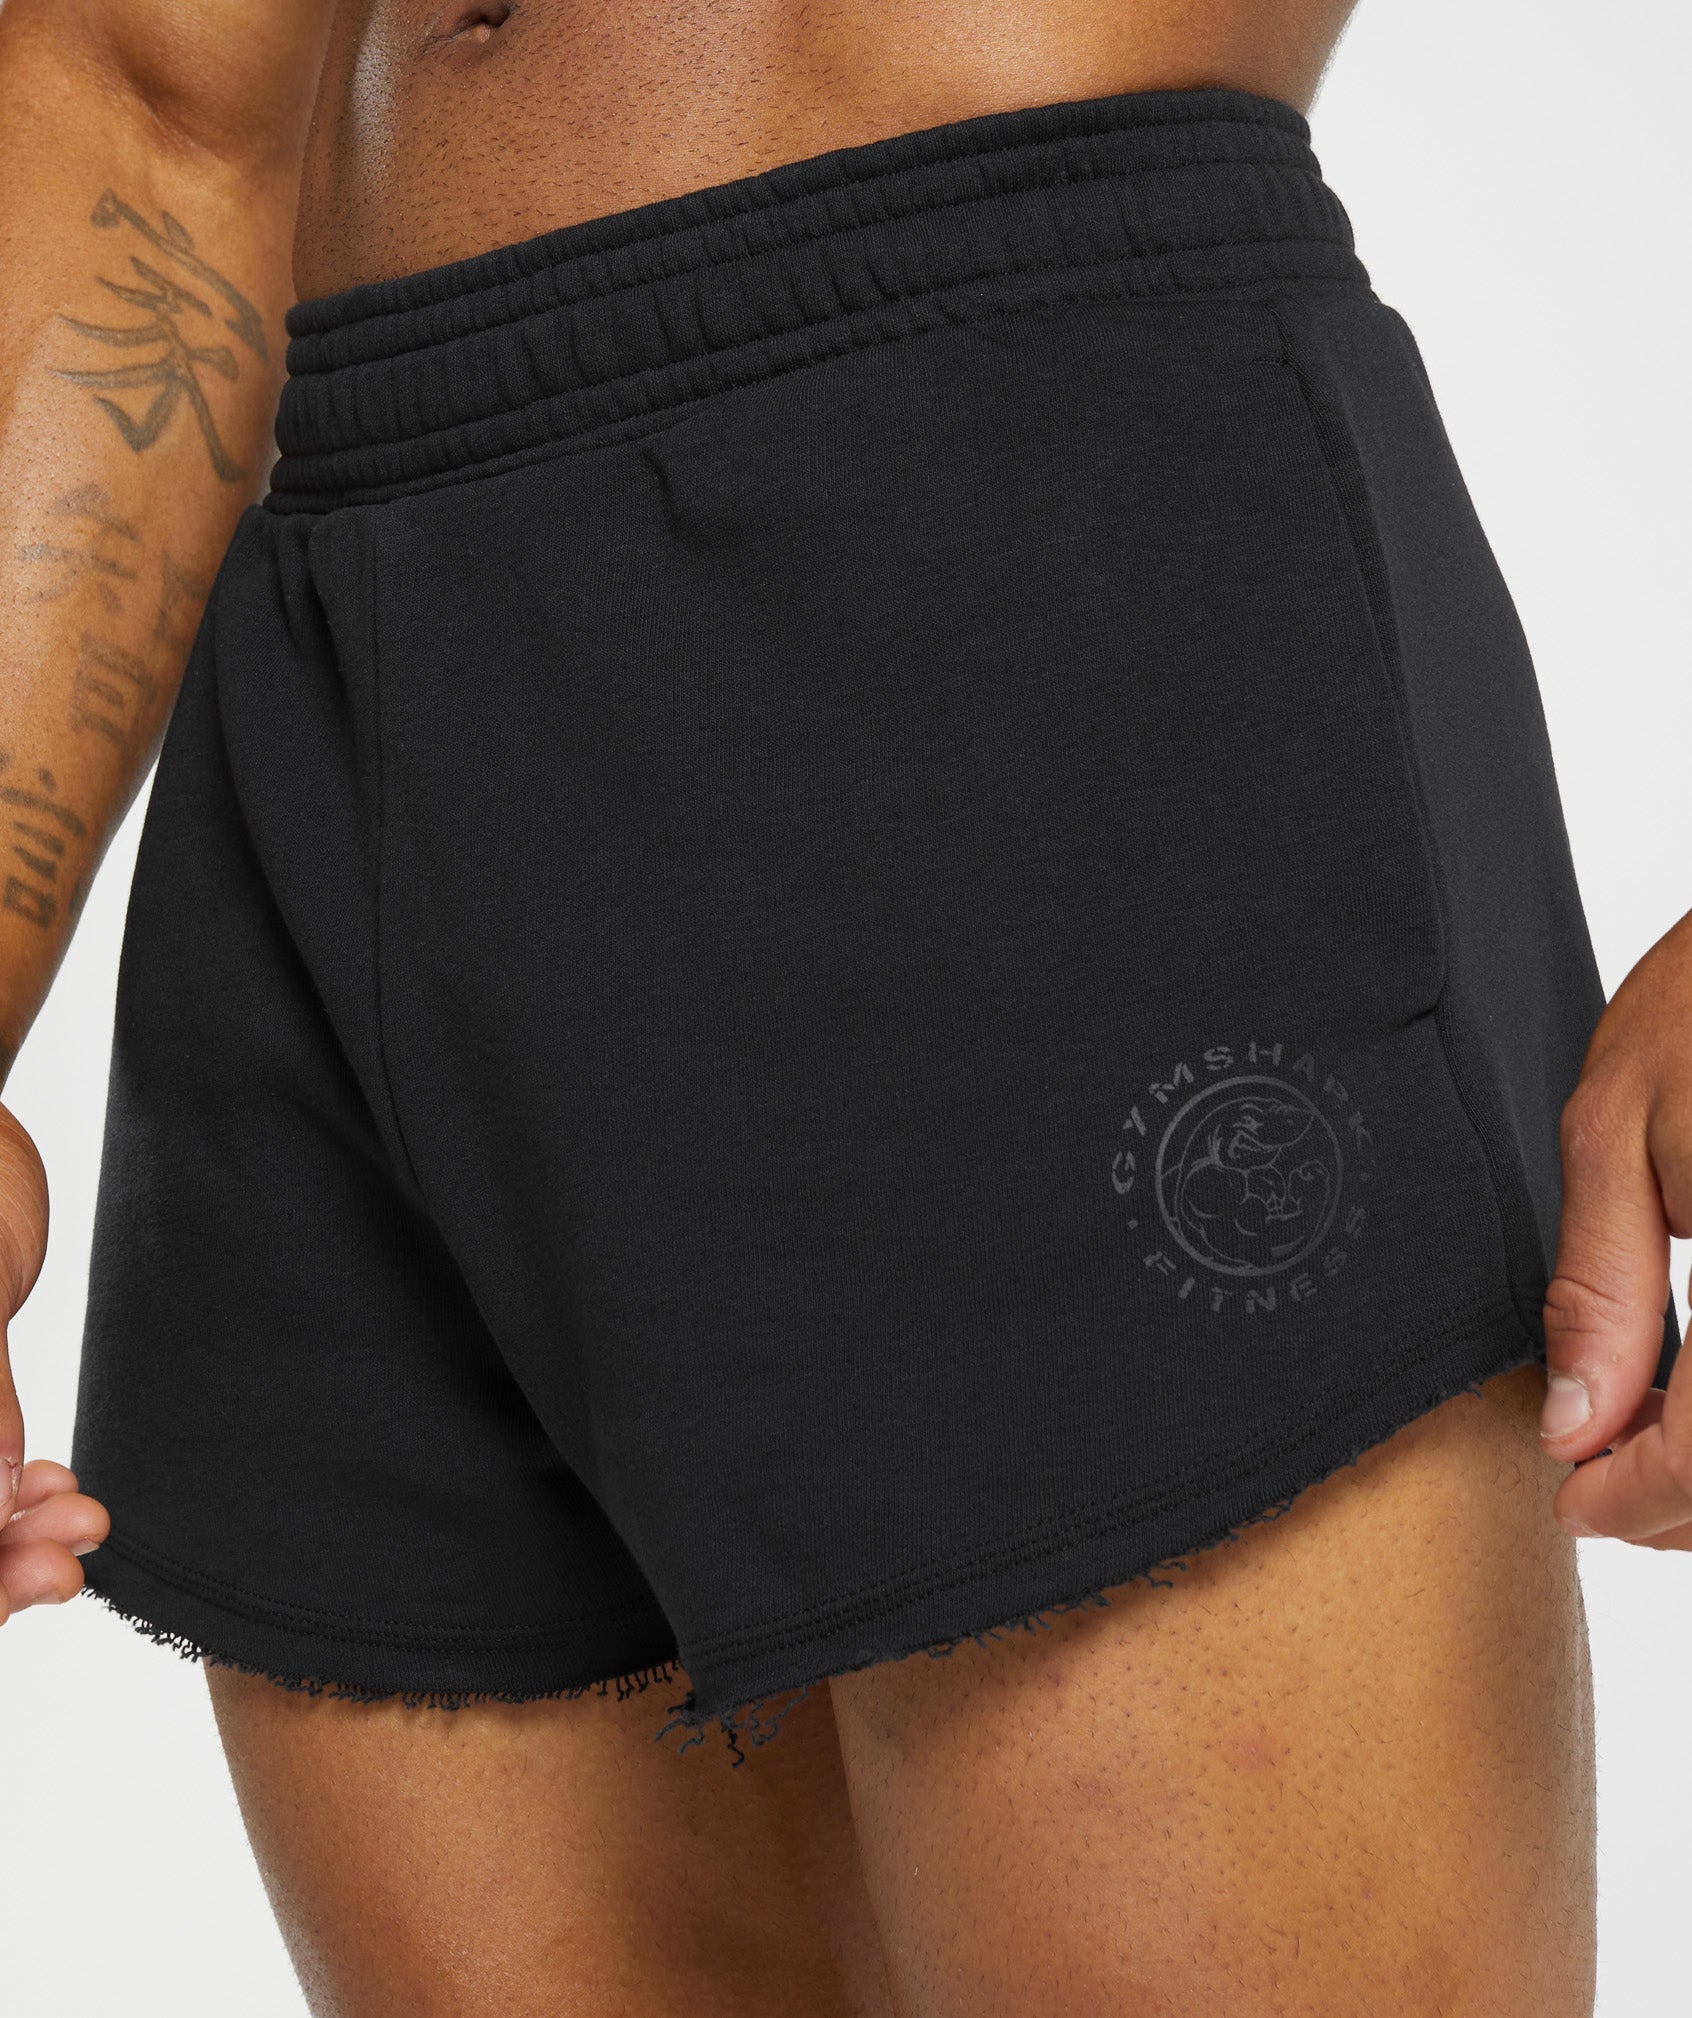 Legacy 4" Shorts in Black - view 5